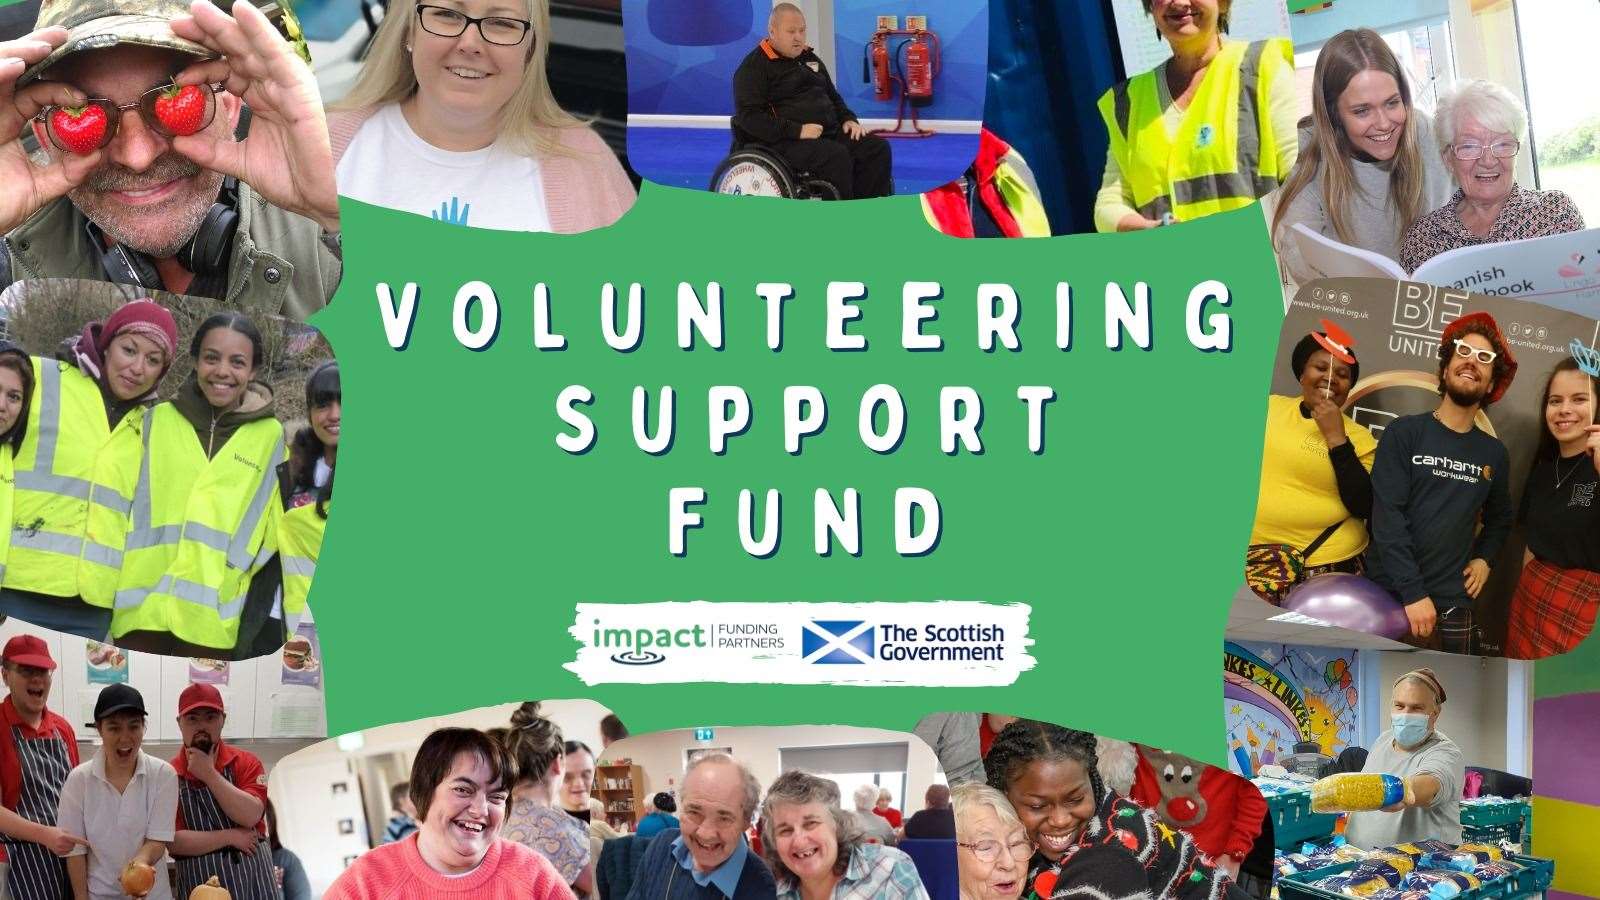 The Volunteering Support Fund aims to help people overcome barriers to volunteering.